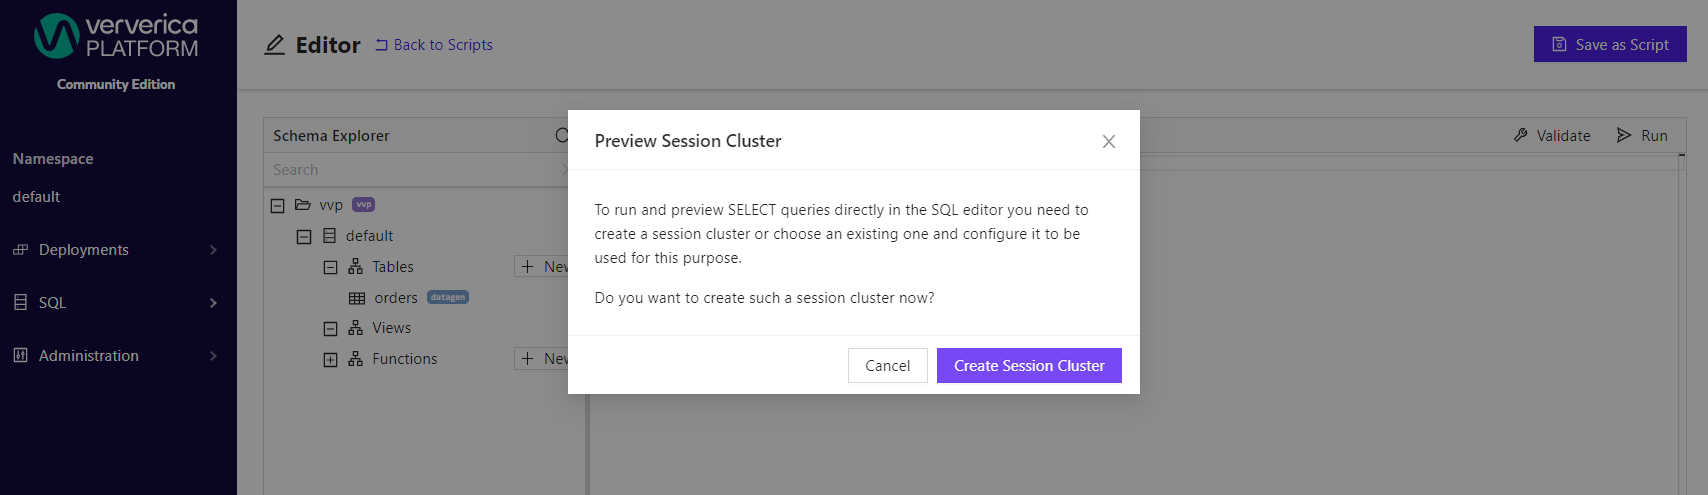 No Preview Session Cluster